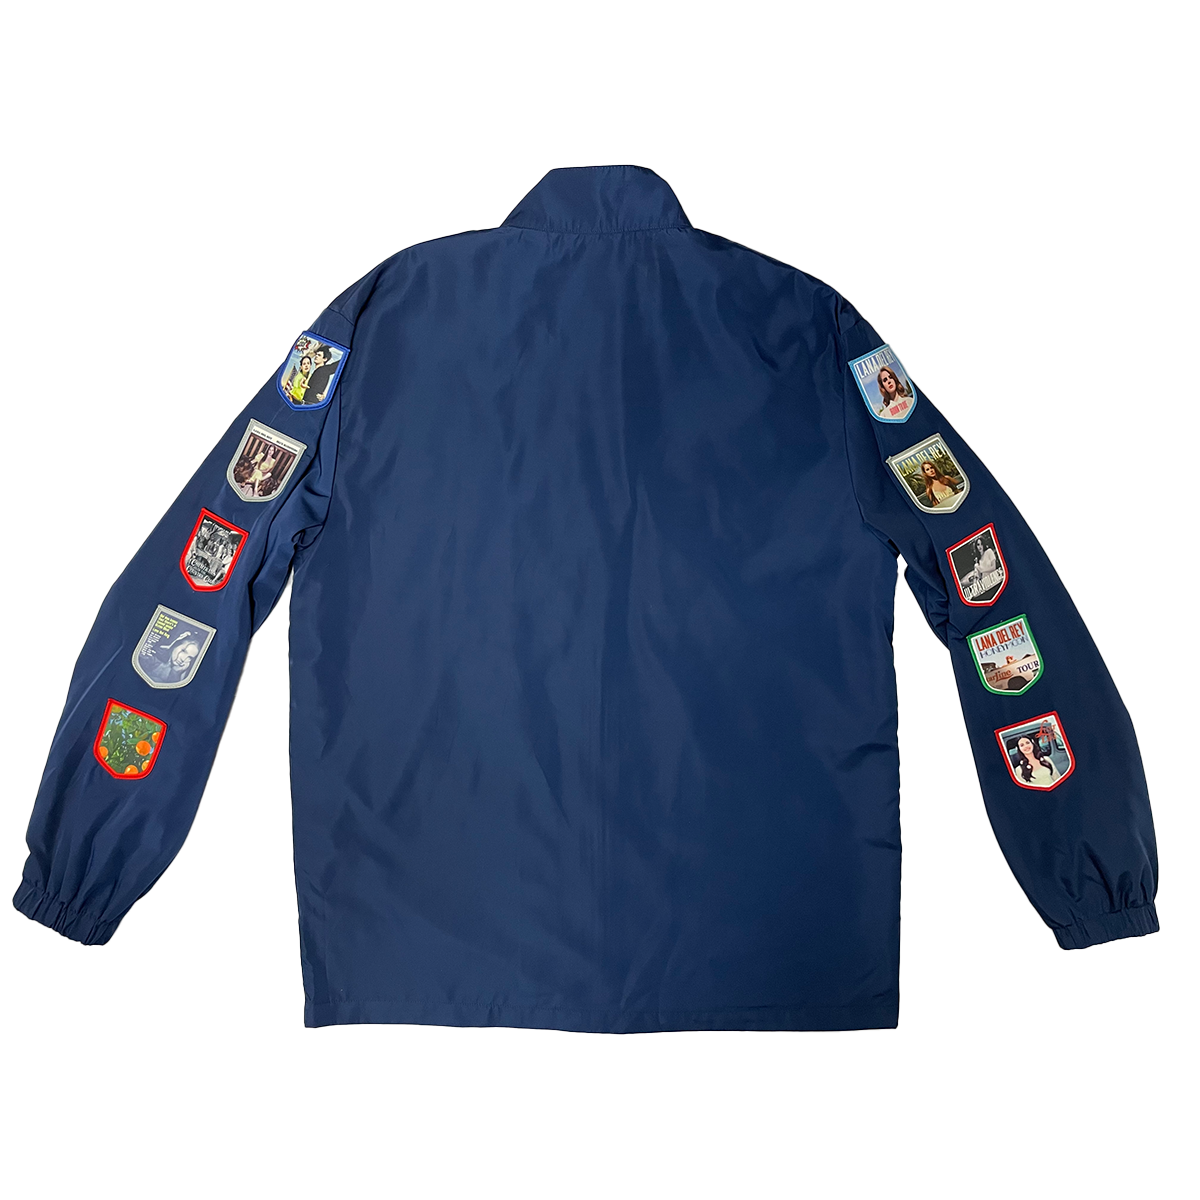 Lana Del Rey - Racing Jacket with Patches